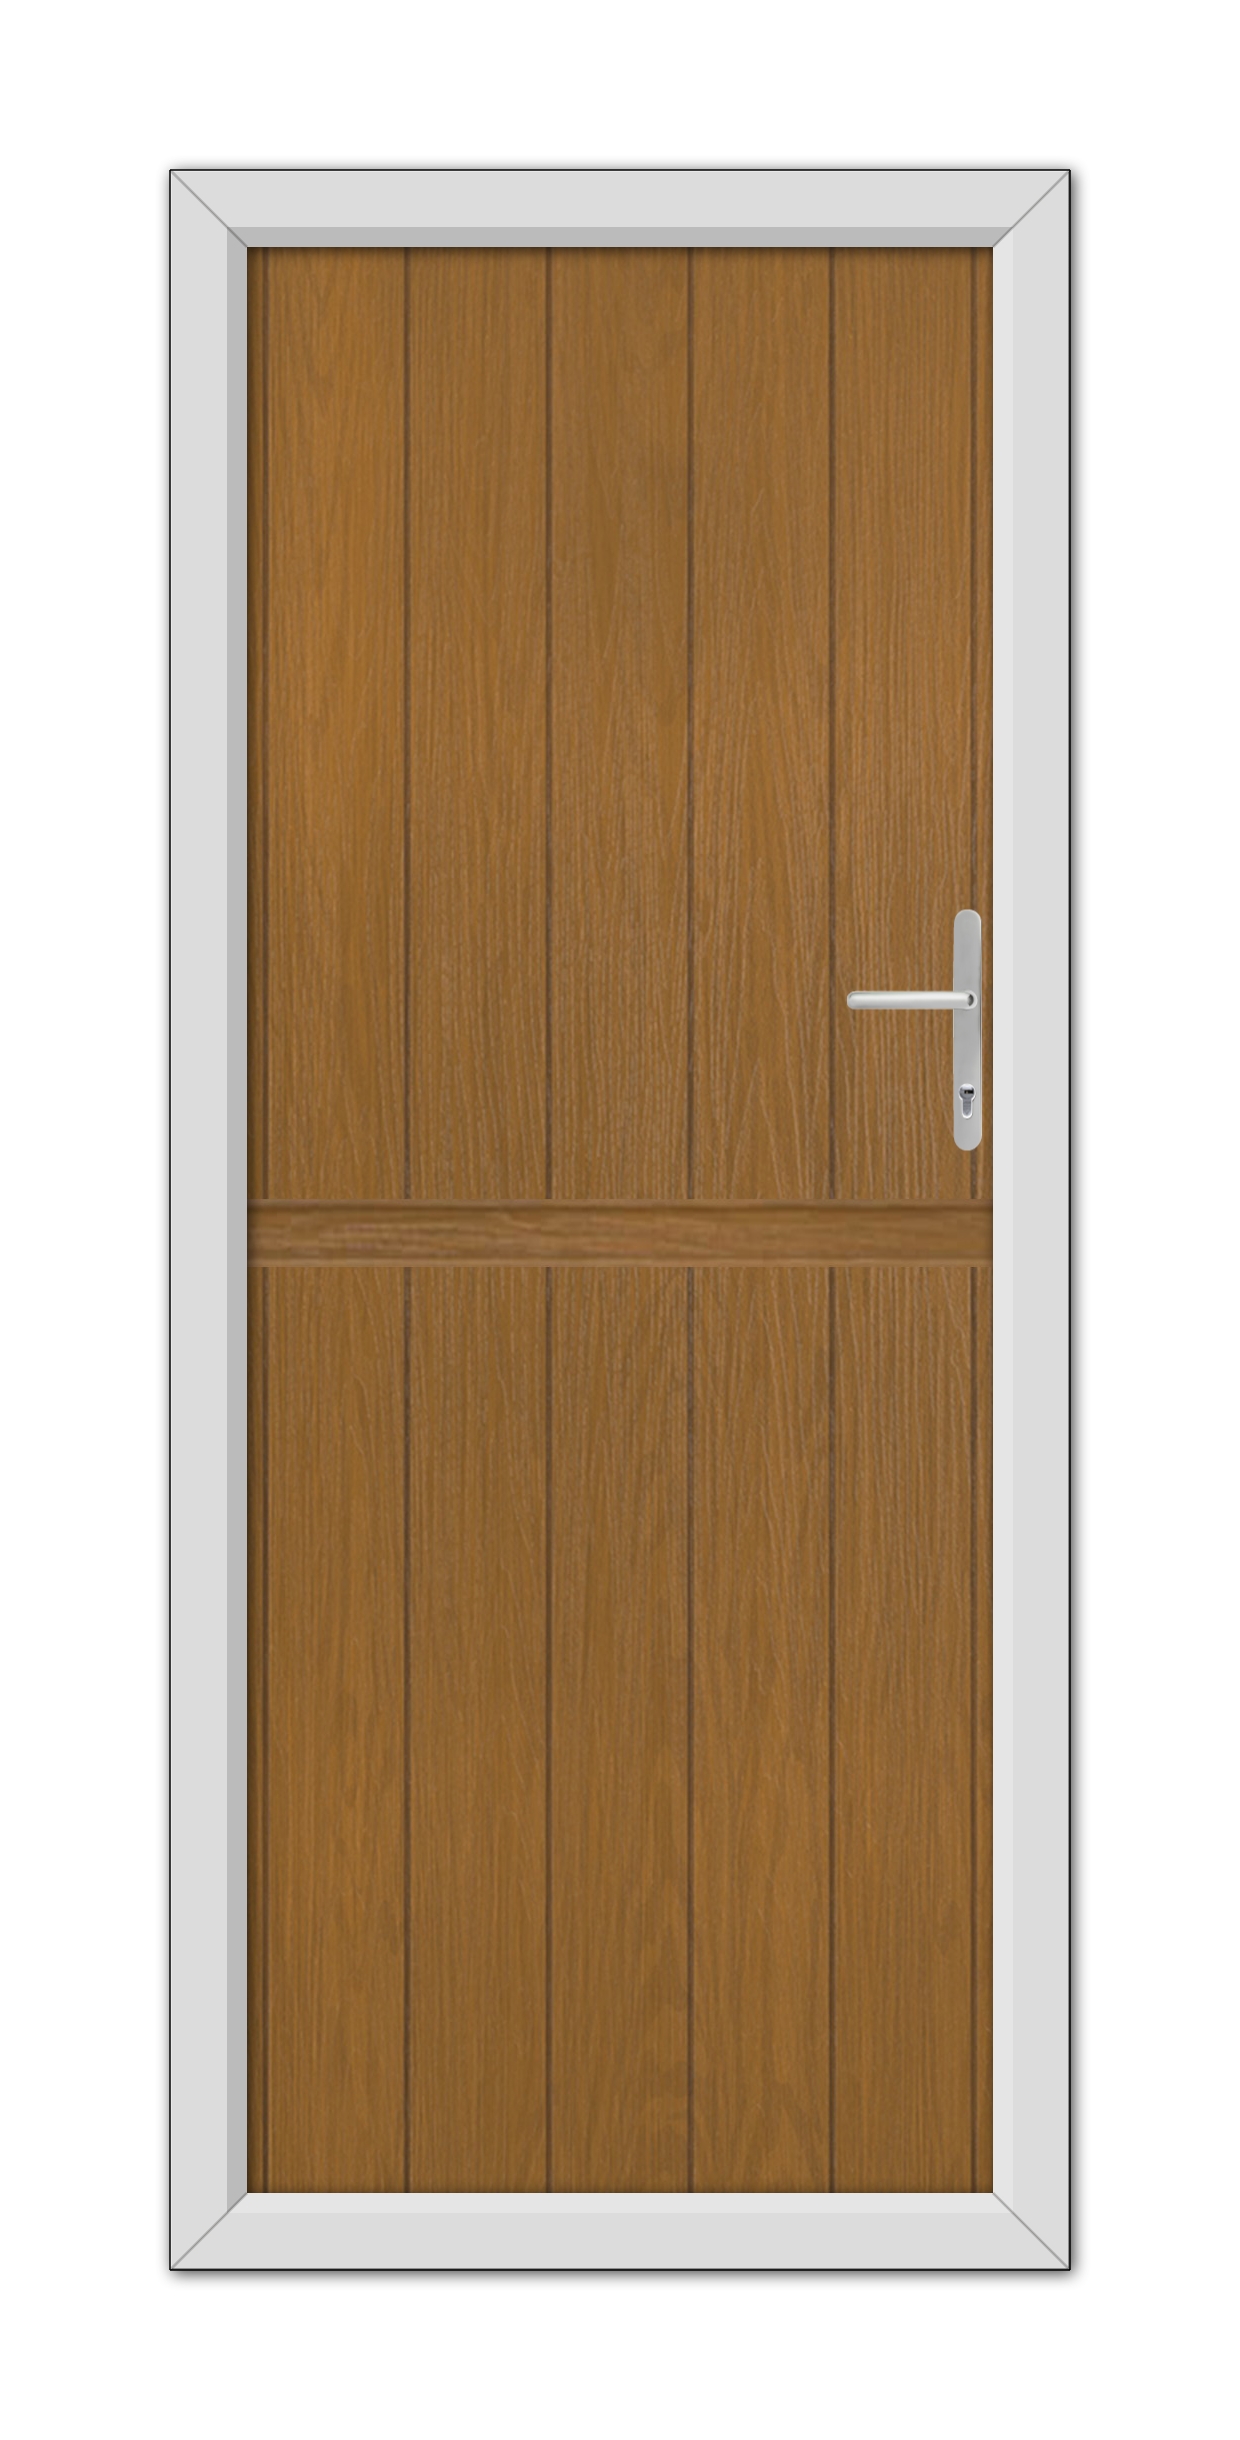 A Oak Norfolk Solid Stable Composite Door 48mm Timber Core with a silver handle, set within a white frame, viewed from the front.